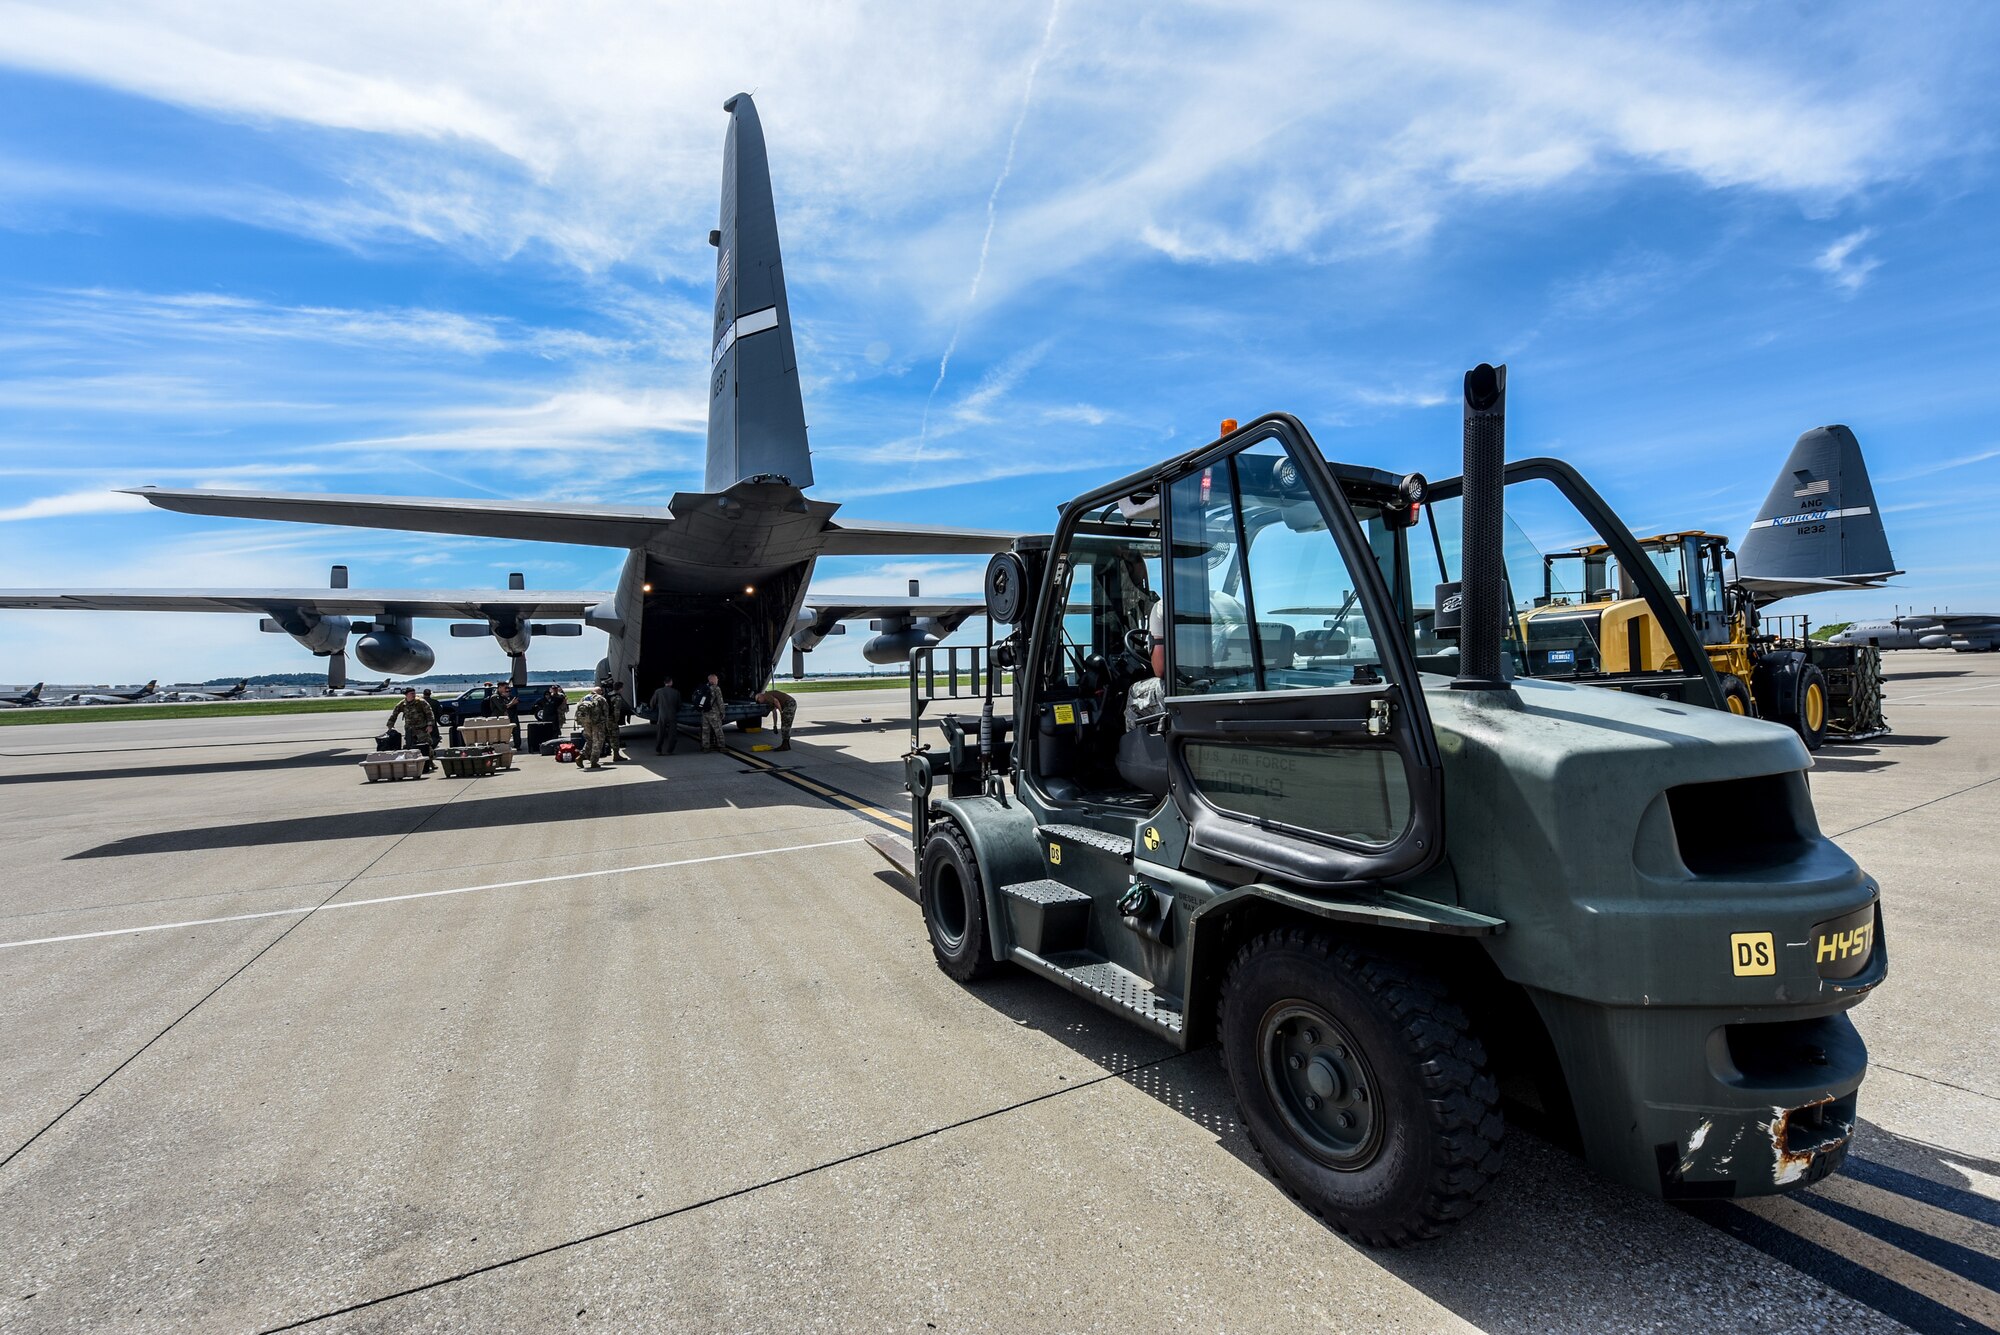 Two C-130 Hercules aircraft and more than 30 Airmen from the Kentucky Air Guard’s 123rd Airlift Wing arrive at the Kentucky Air National Guard Base in Louisville, Ky., June 11, 2019, after participating in a week-long event in France for the 75th anniversary of D-Day. The D-Day invasion, formally known as Operation Overlord, turned the tide of World War II in the European theater. (U.S. Air National Guard photo by Staff Sgt. Joshua Horton)